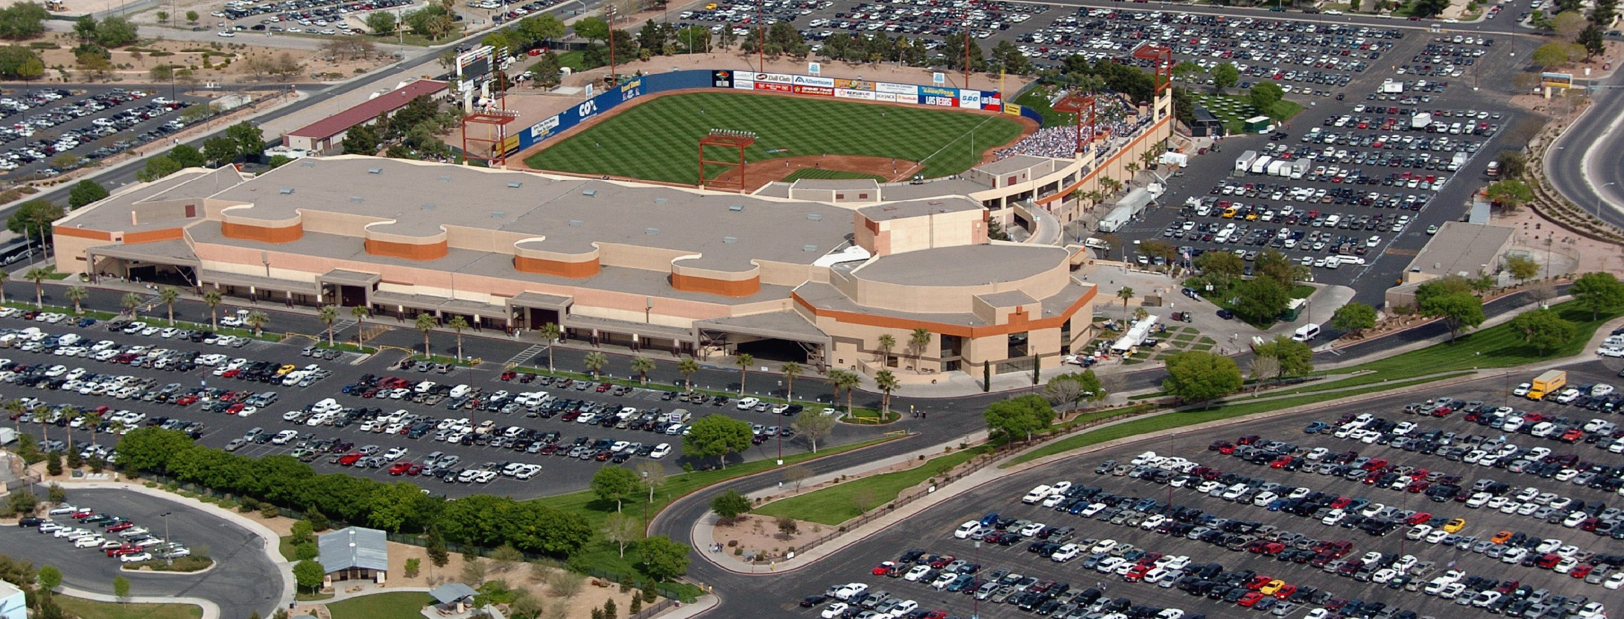 The City of Las Vegas is considering redeveloping Cashman Field, site of a shuttered exhibit hall and an underused minor-league sports stadium, into a medical complex. (Image: lasvegasnevada.gov)